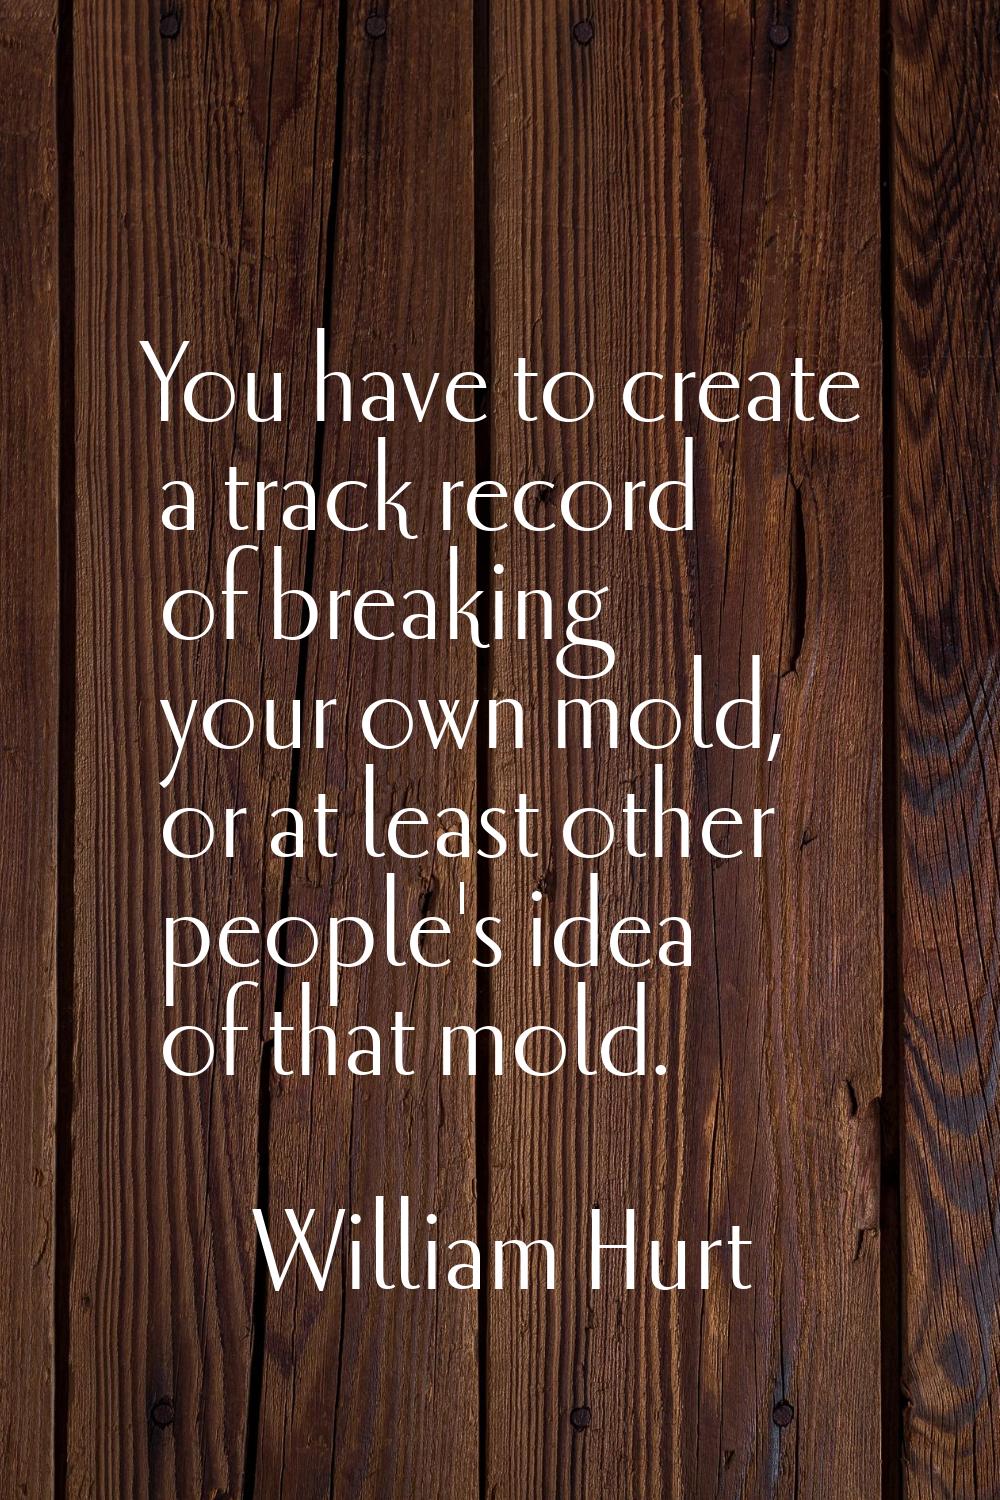 You have to create a track record of breaking your own mold, or at least other people's idea of tha